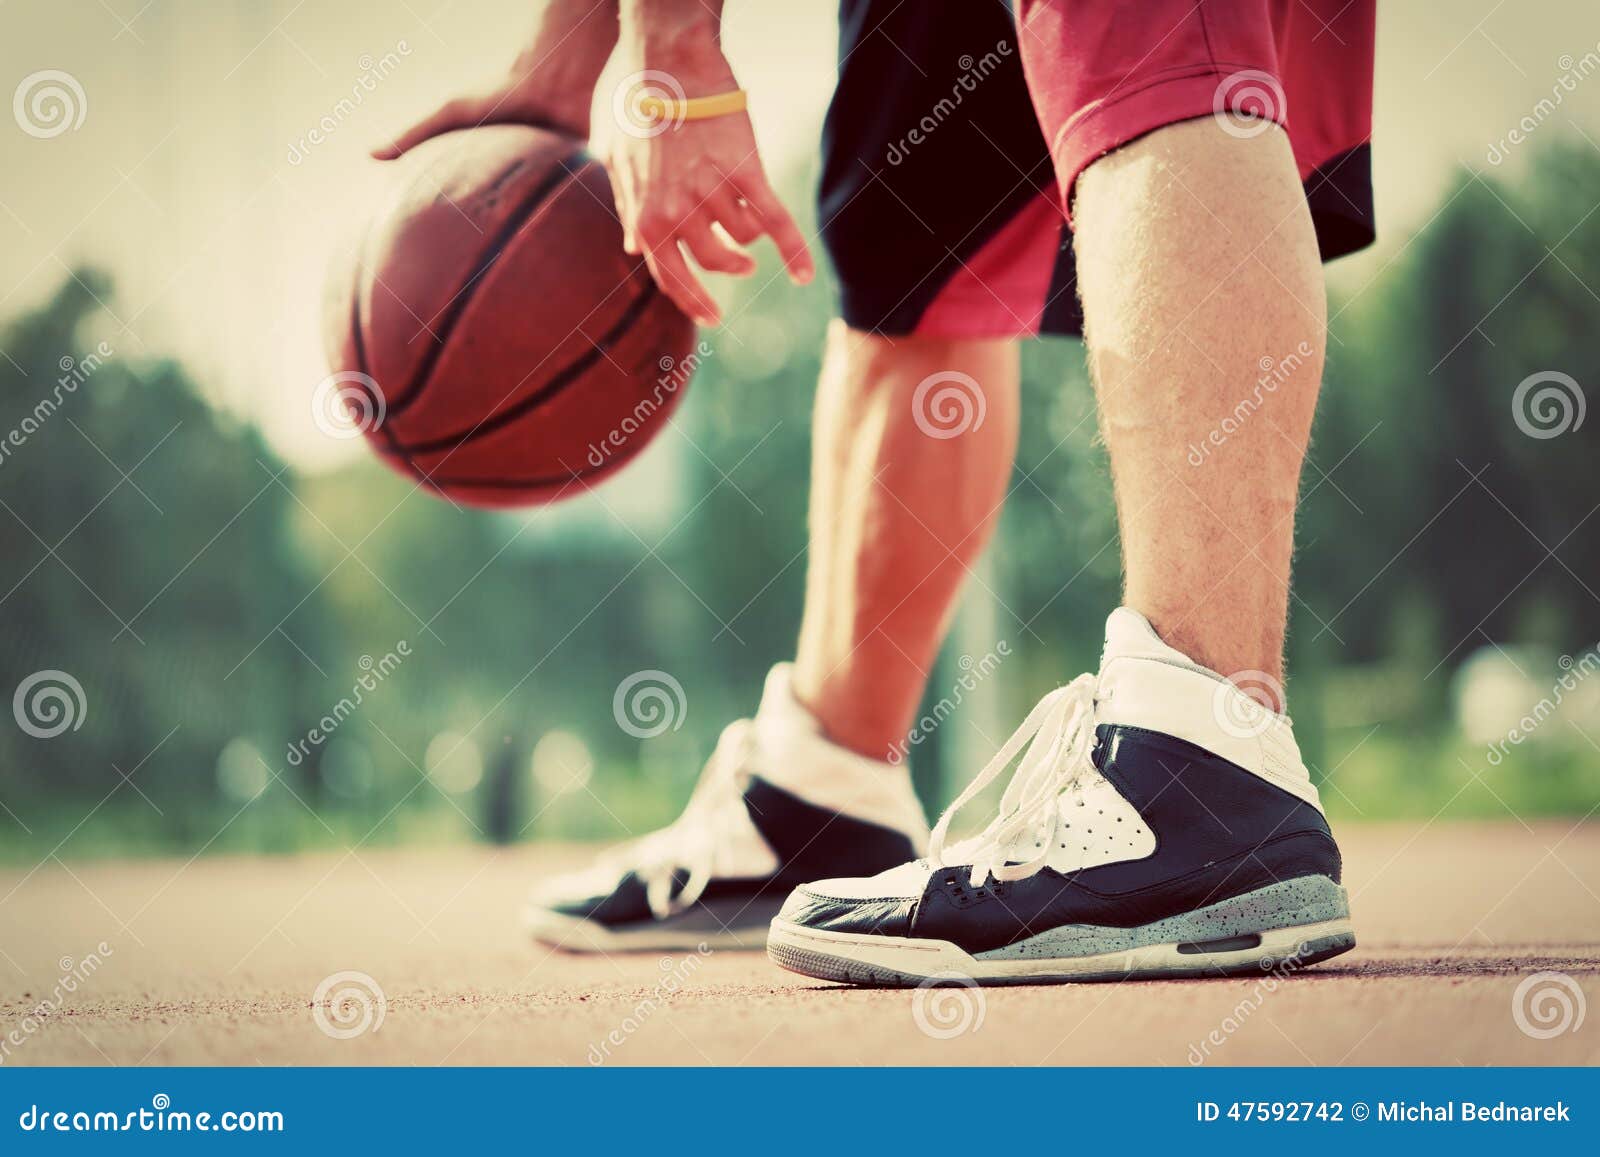 young man on basketball court dribbling with ball